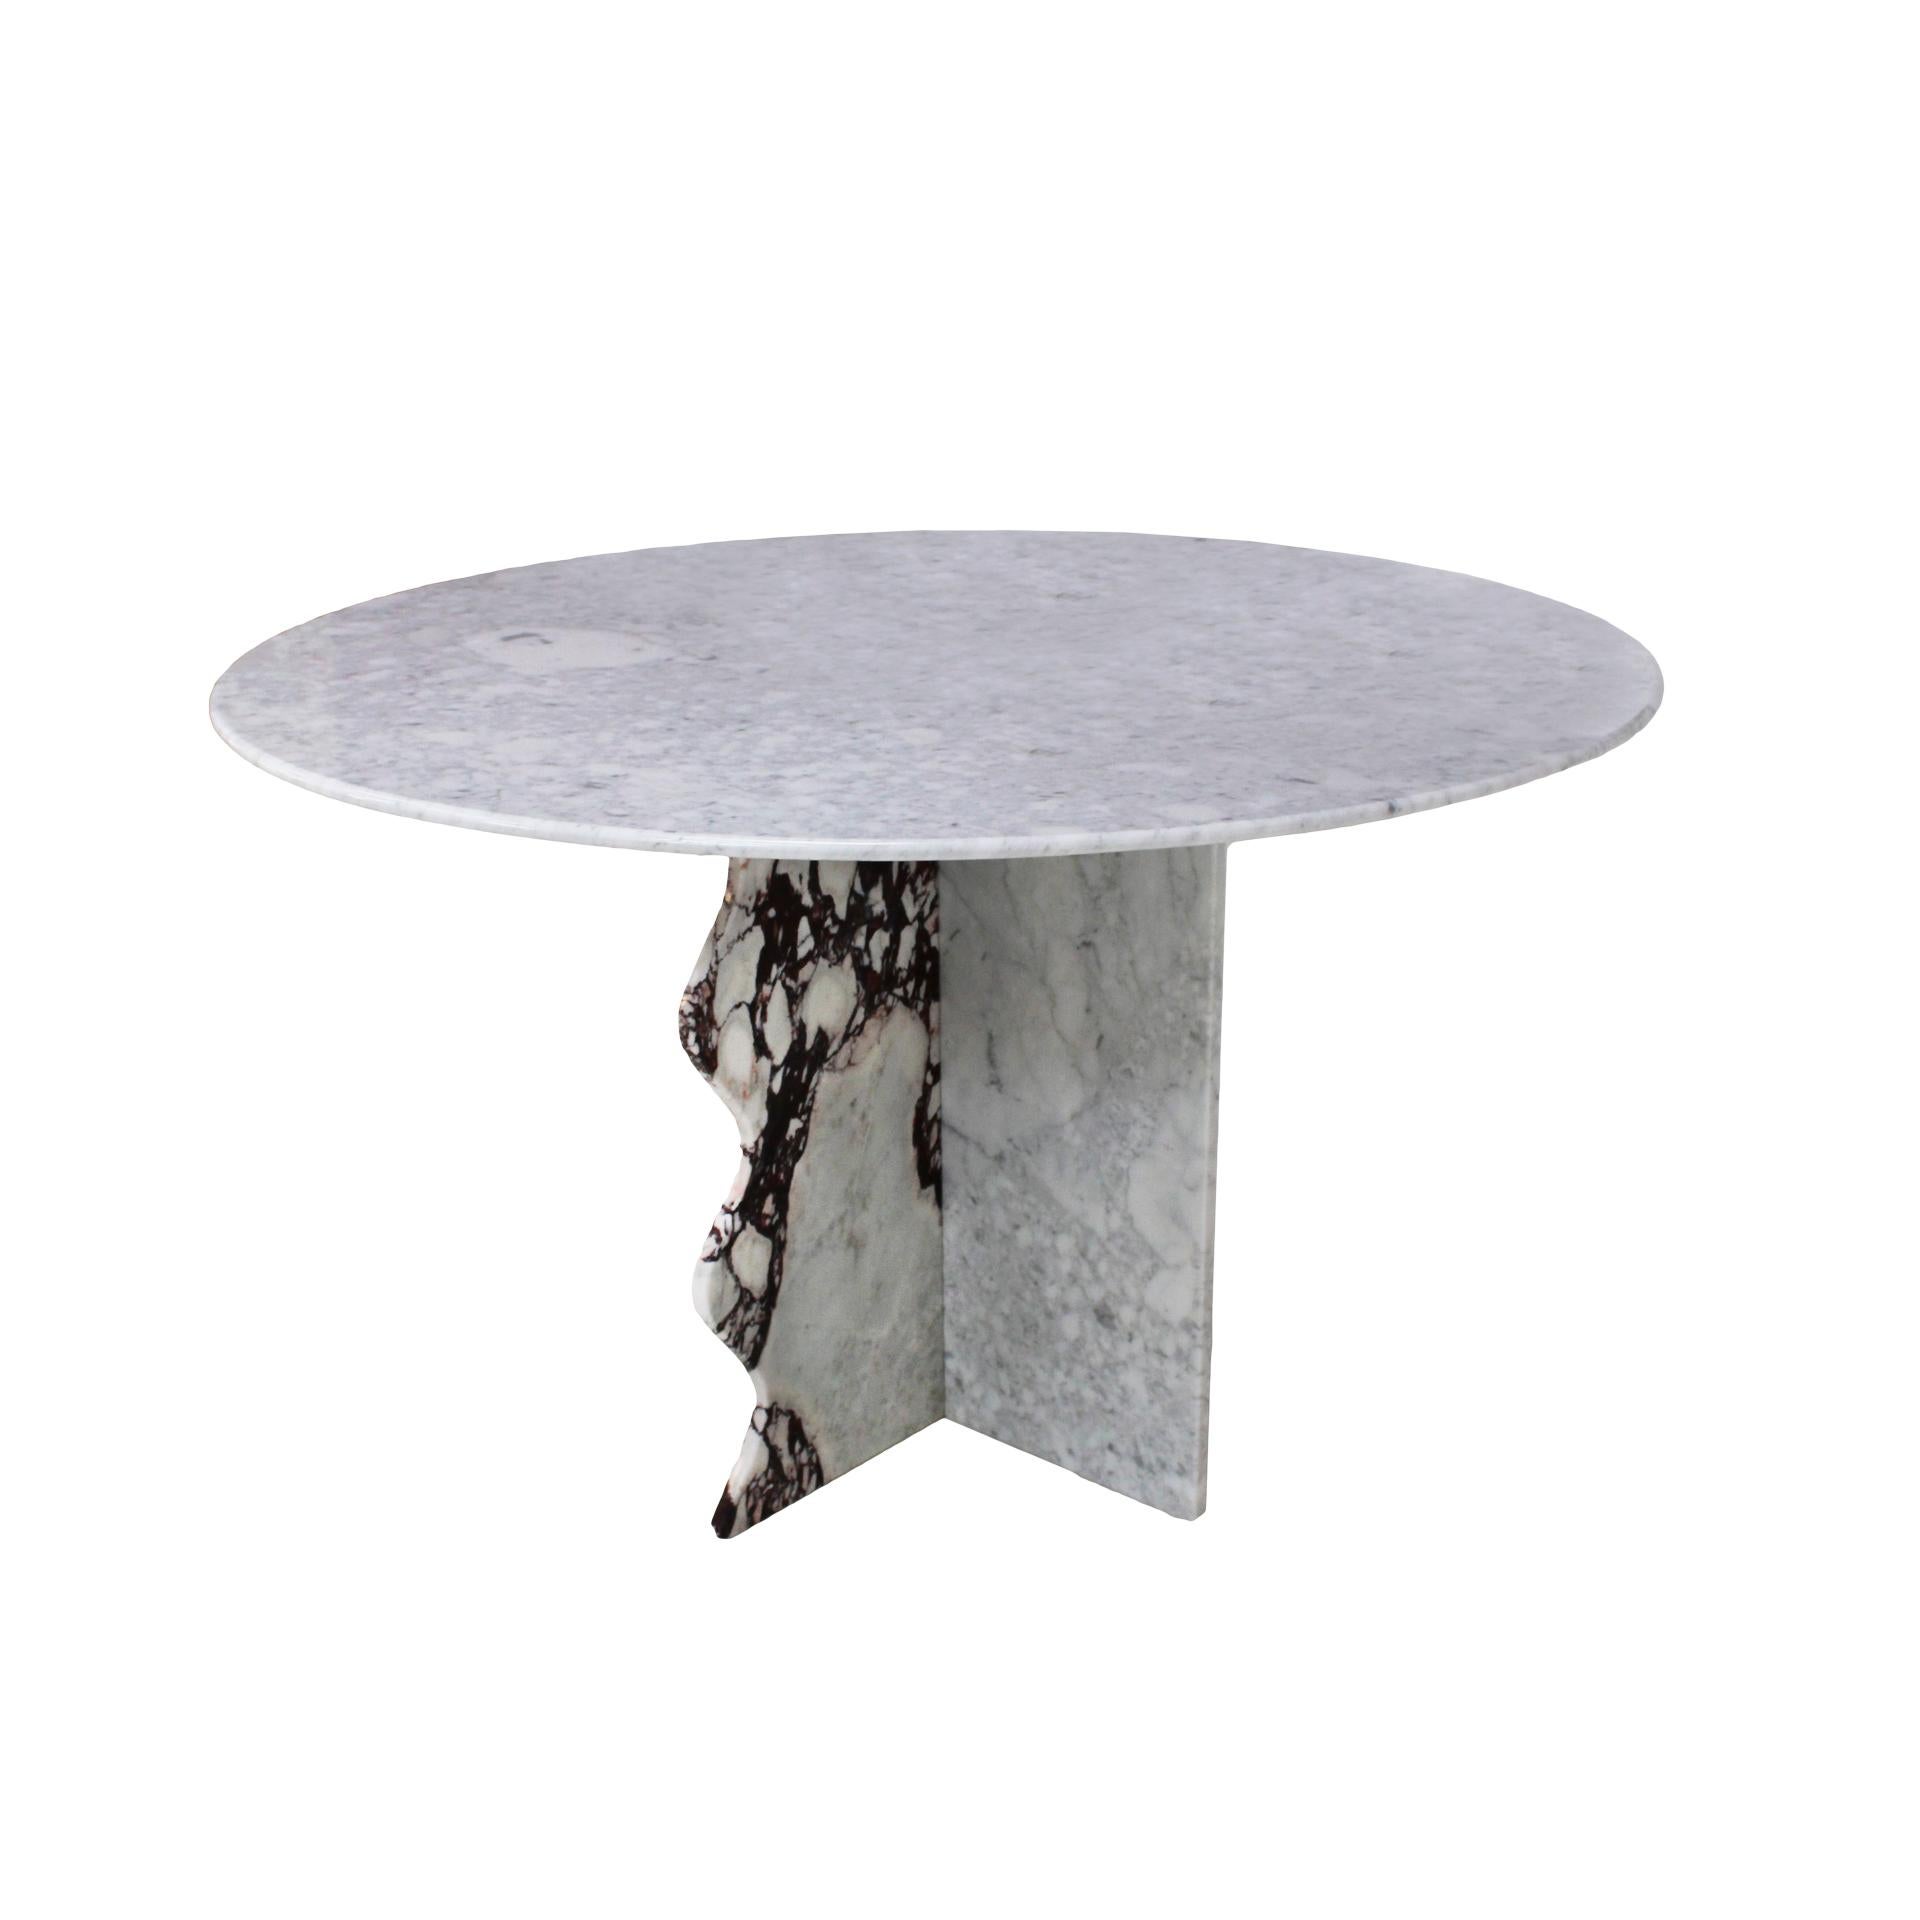 Circular table designed and produced by L.A. Studio. Made of Carrara ans Arabescato marble. 

Our main target is customer satisfaction, so we include in the price for this item professional and custom made packing.

Every item LA Studio offers is